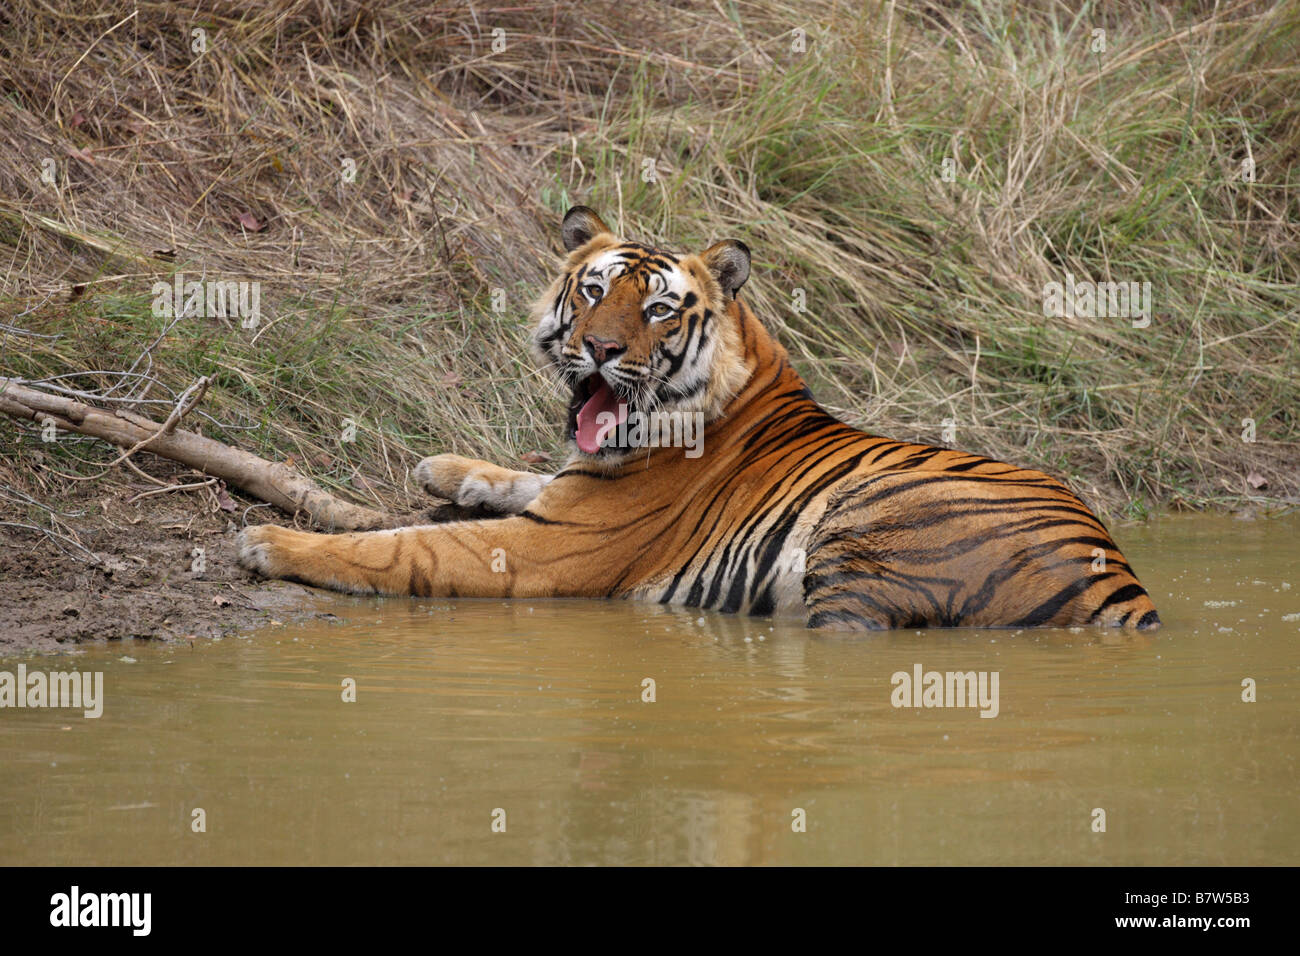 Bengal Tiger Panthera tigris lying in a water hole with refelction yawning with eye contact Stock Photo